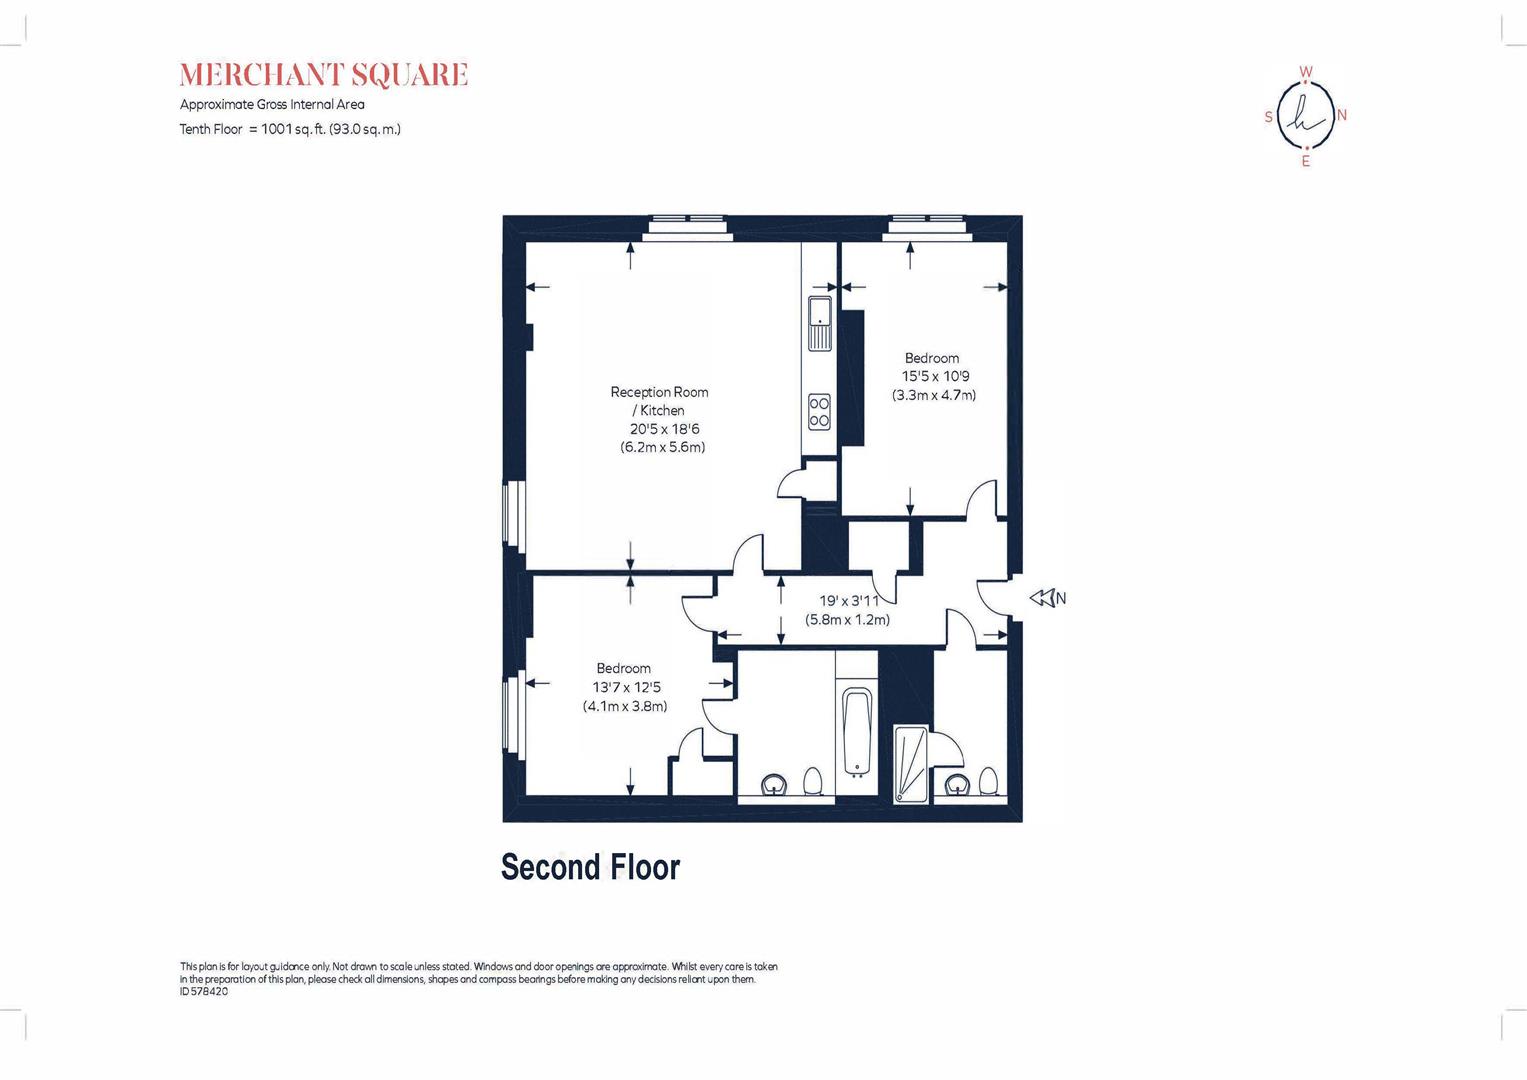 2 bed apartment for sale in Merchant Square East, Paddington - Property floorplan